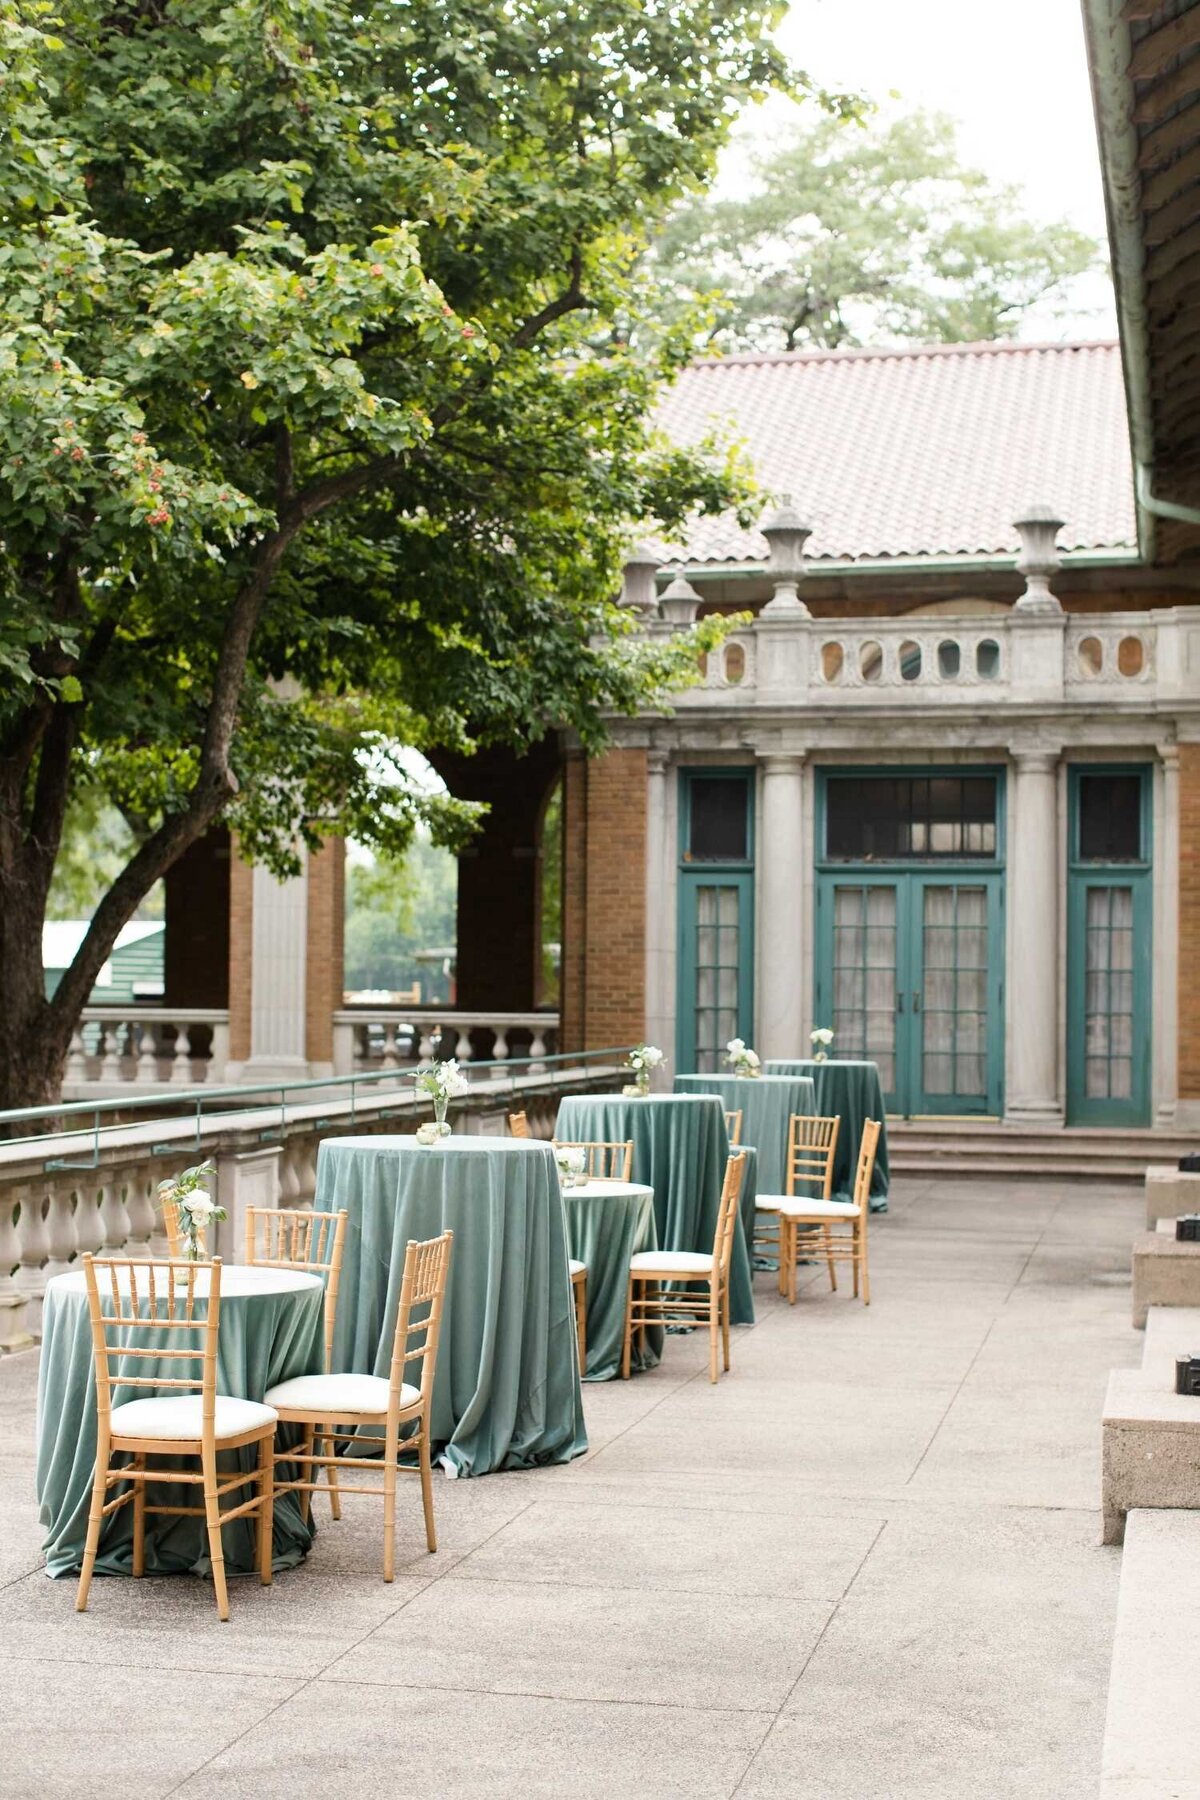 Outdoor Cocktail hour on the Terrace at Columbus Park Refectory for a Luxury Chicago Outdoor Historic Wedding Venue.